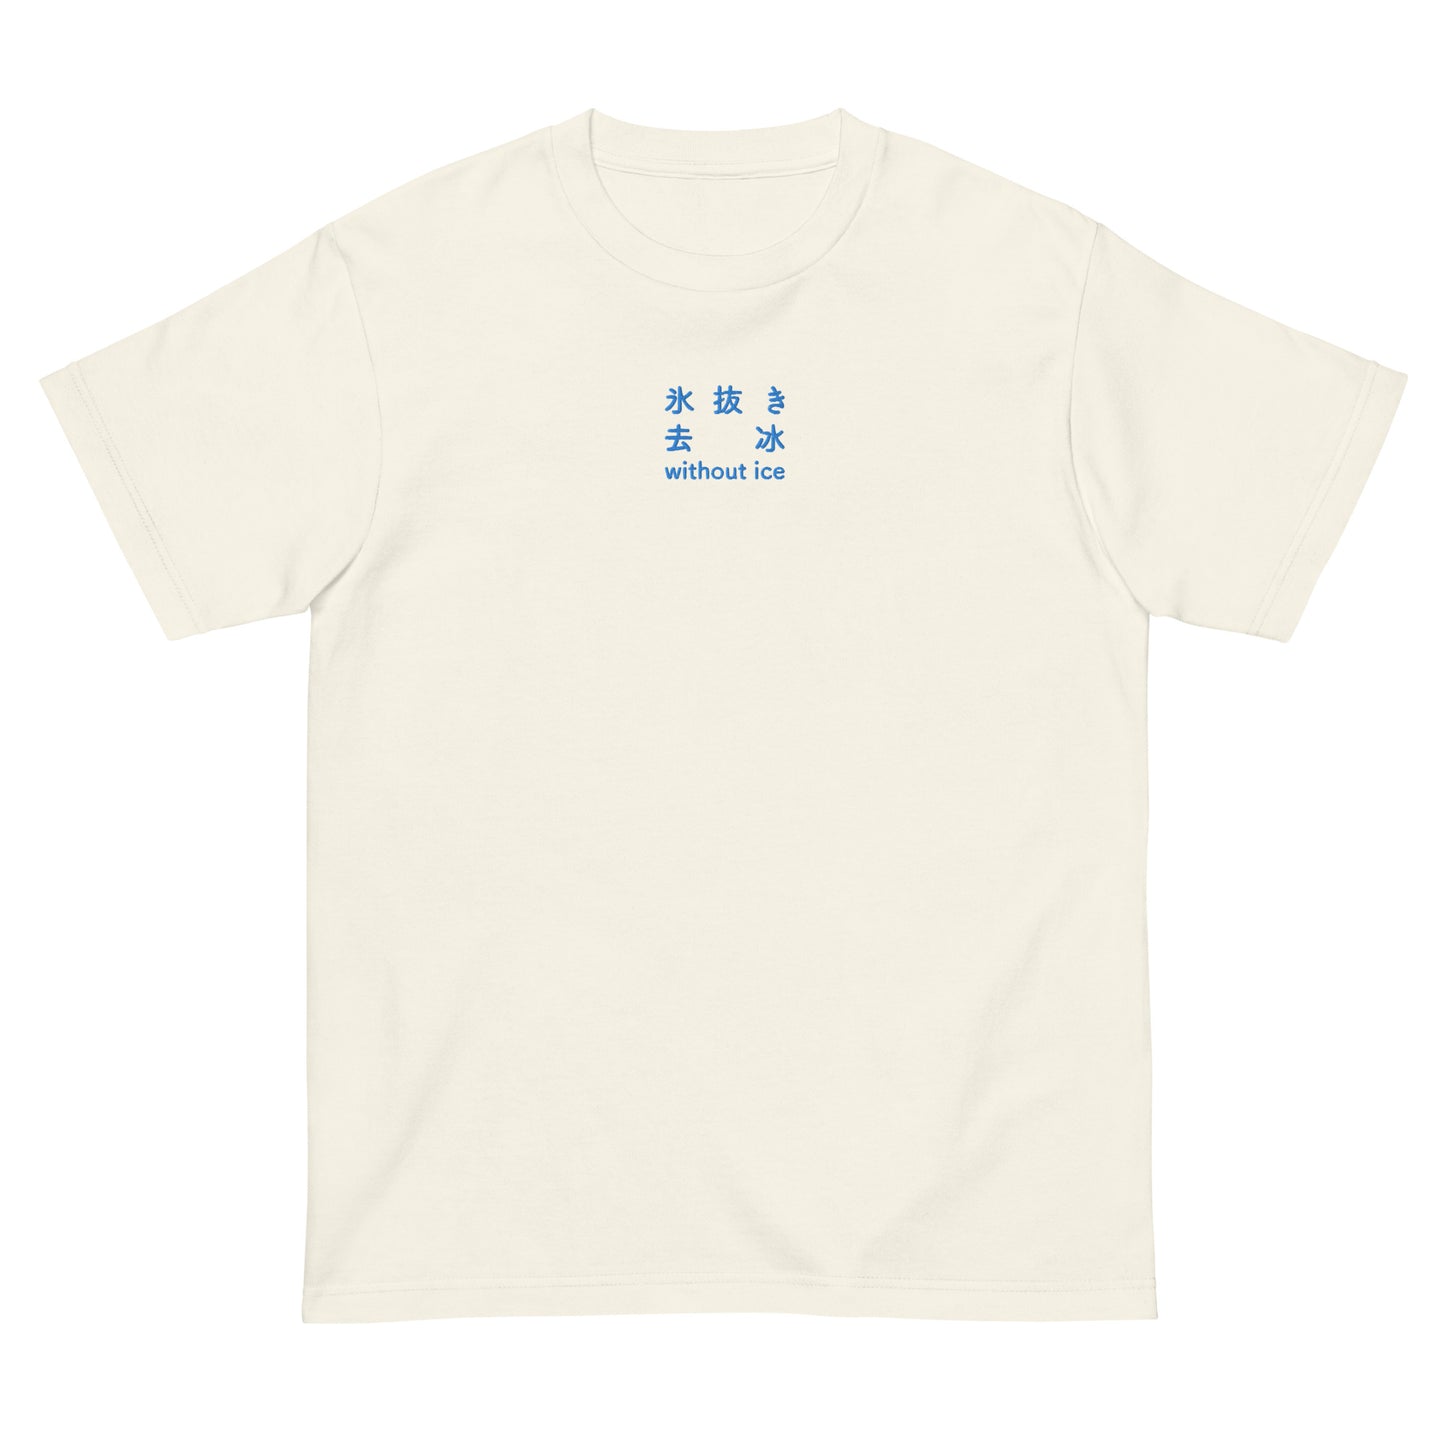 Ivory High Quality Tee - Front Design with an Blue Embroidery "Without Ice" in Japanese,Chinese and English